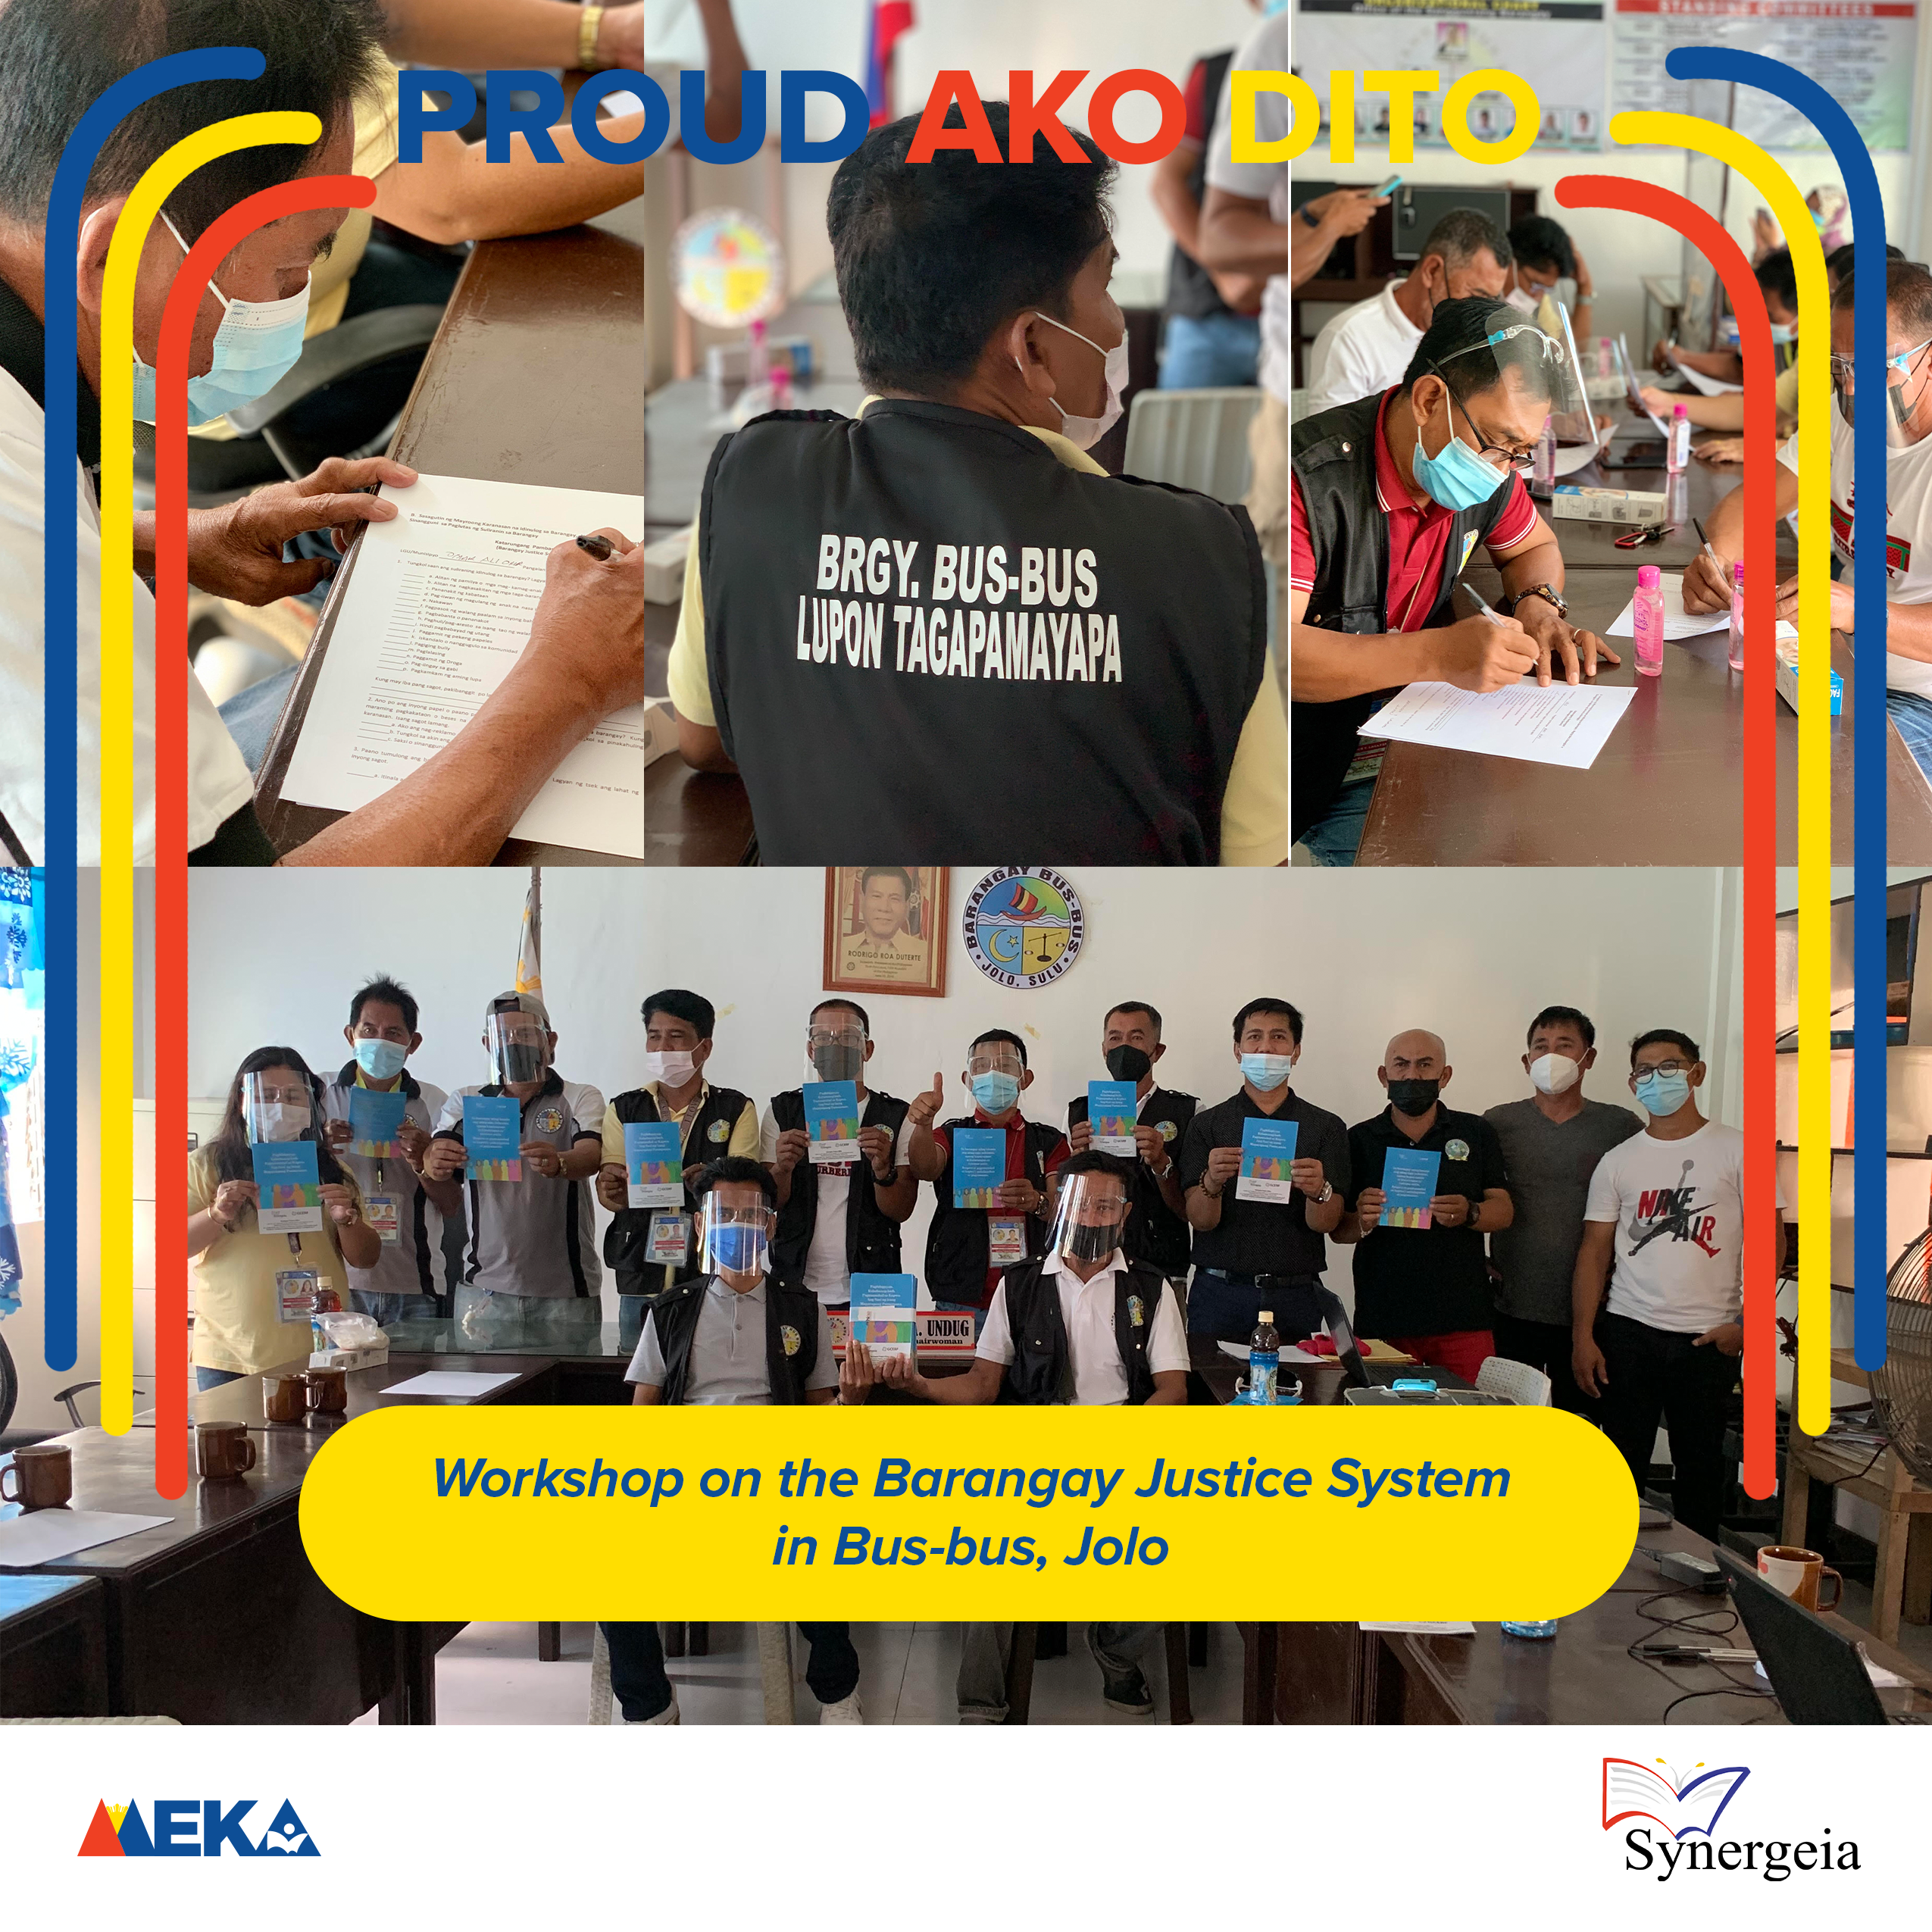 BARANGAY JUSTICE SYSTEM:  THE JUSTICE LEAGUE IN BUS-BUS